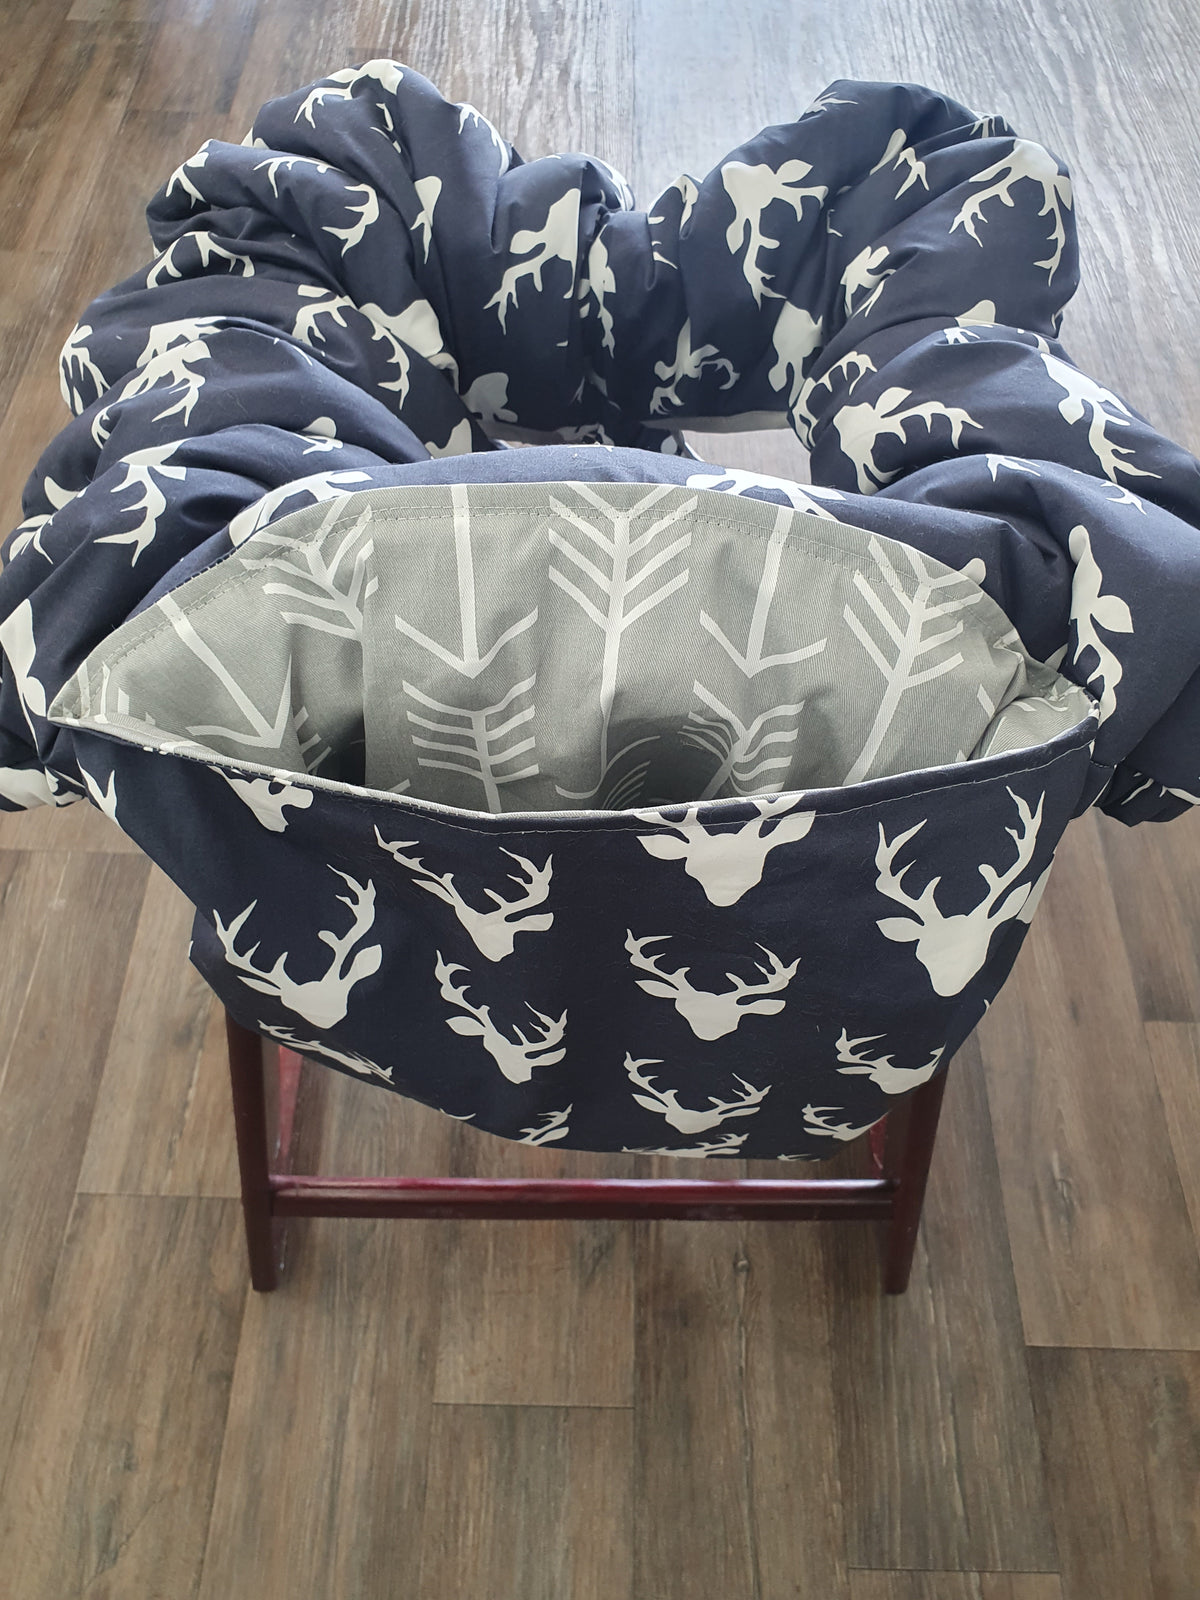 Cart Cover- Reversible Navy Buck and Gray Arrow Highchair/Cart Cover - DBC Baby Bedding Co 